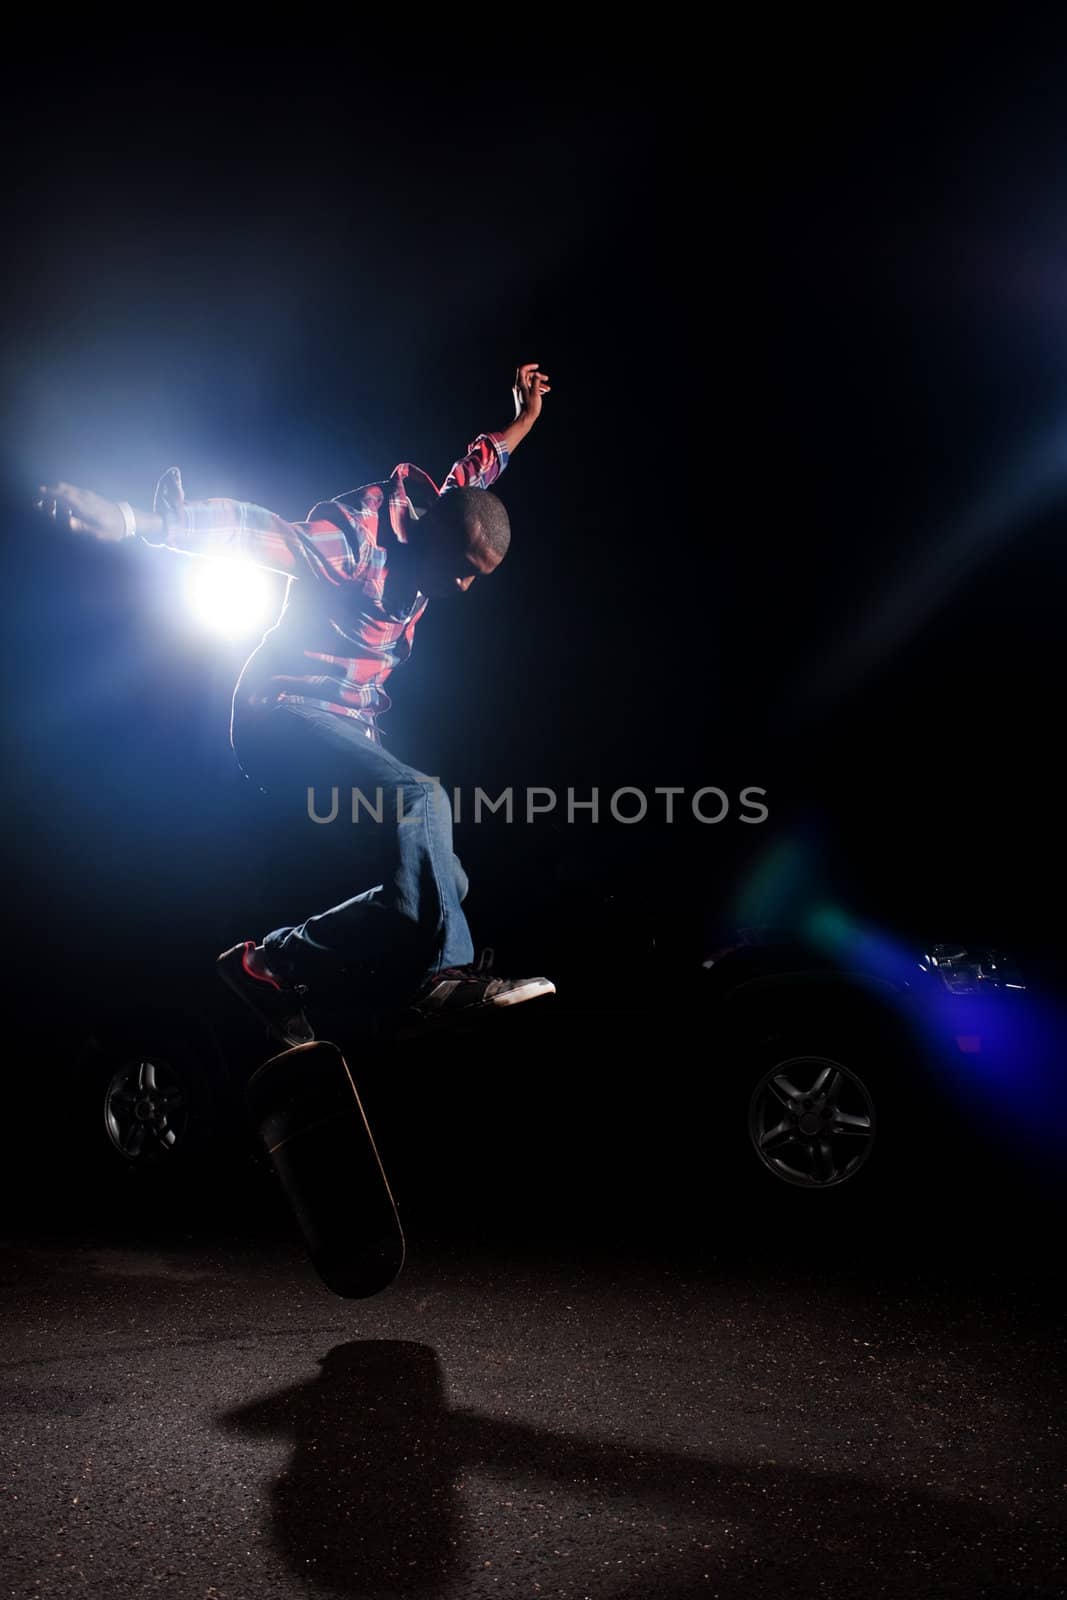 A young skateboarder doing jumping and kick flip tricks under dramatic rim lighting with lens flare. 